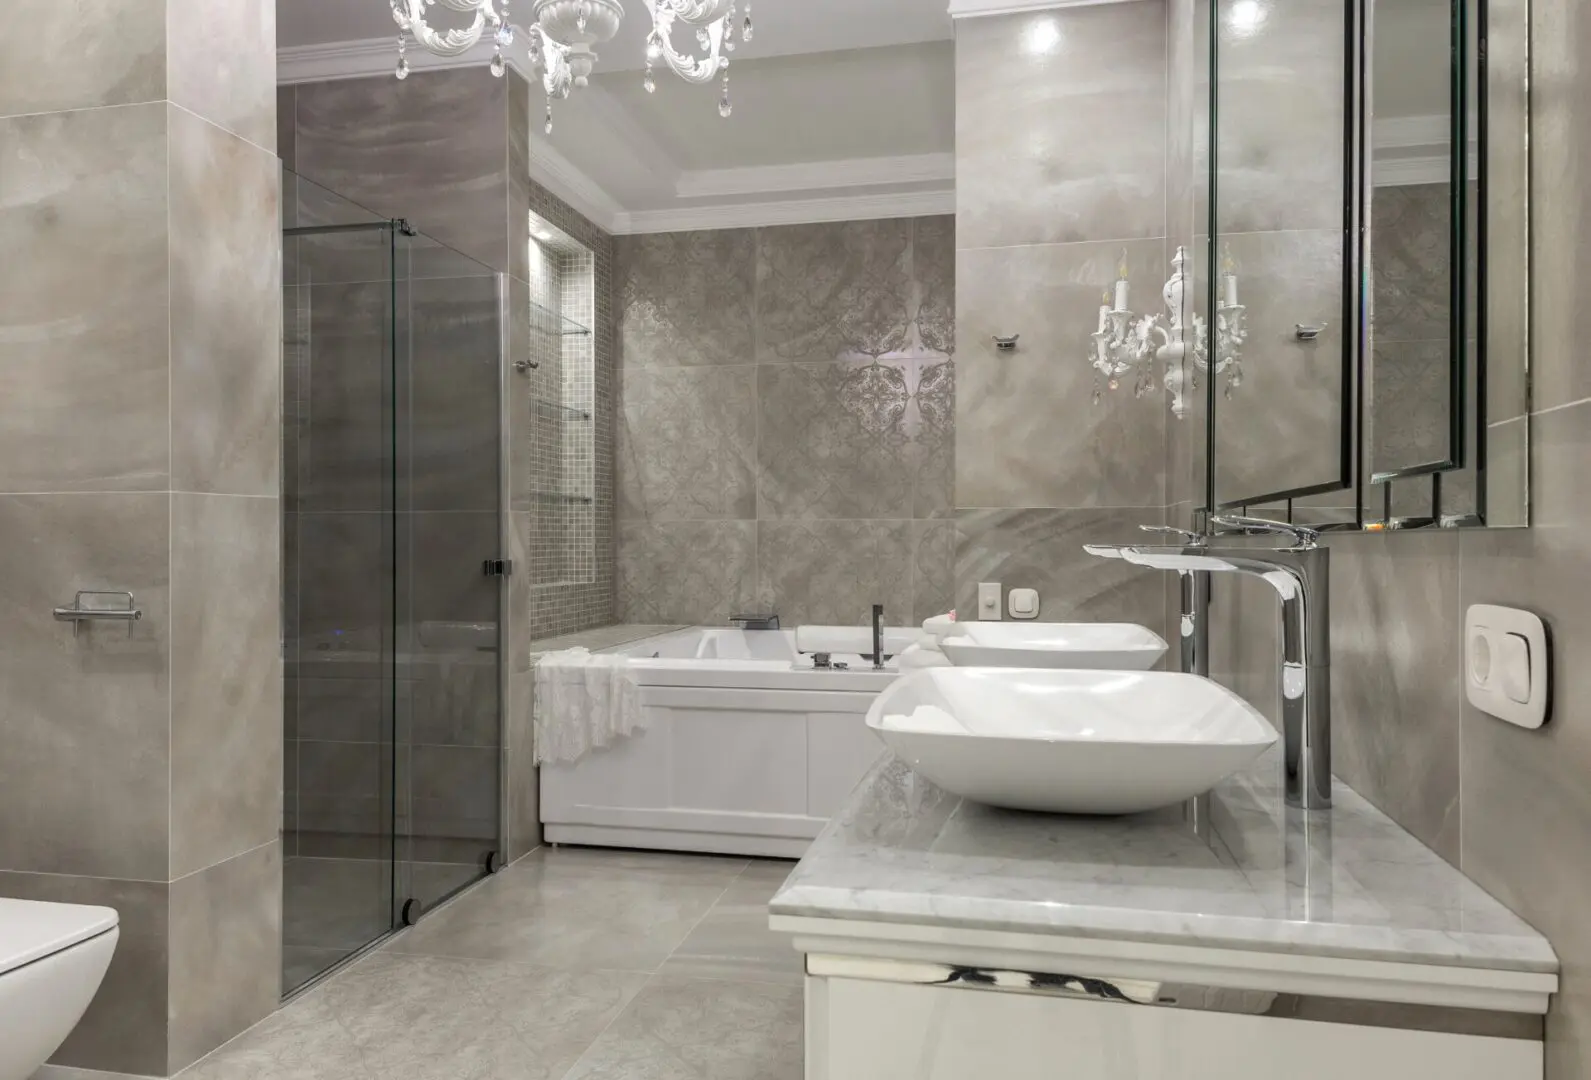 A contemporary bathroom with a chandelier